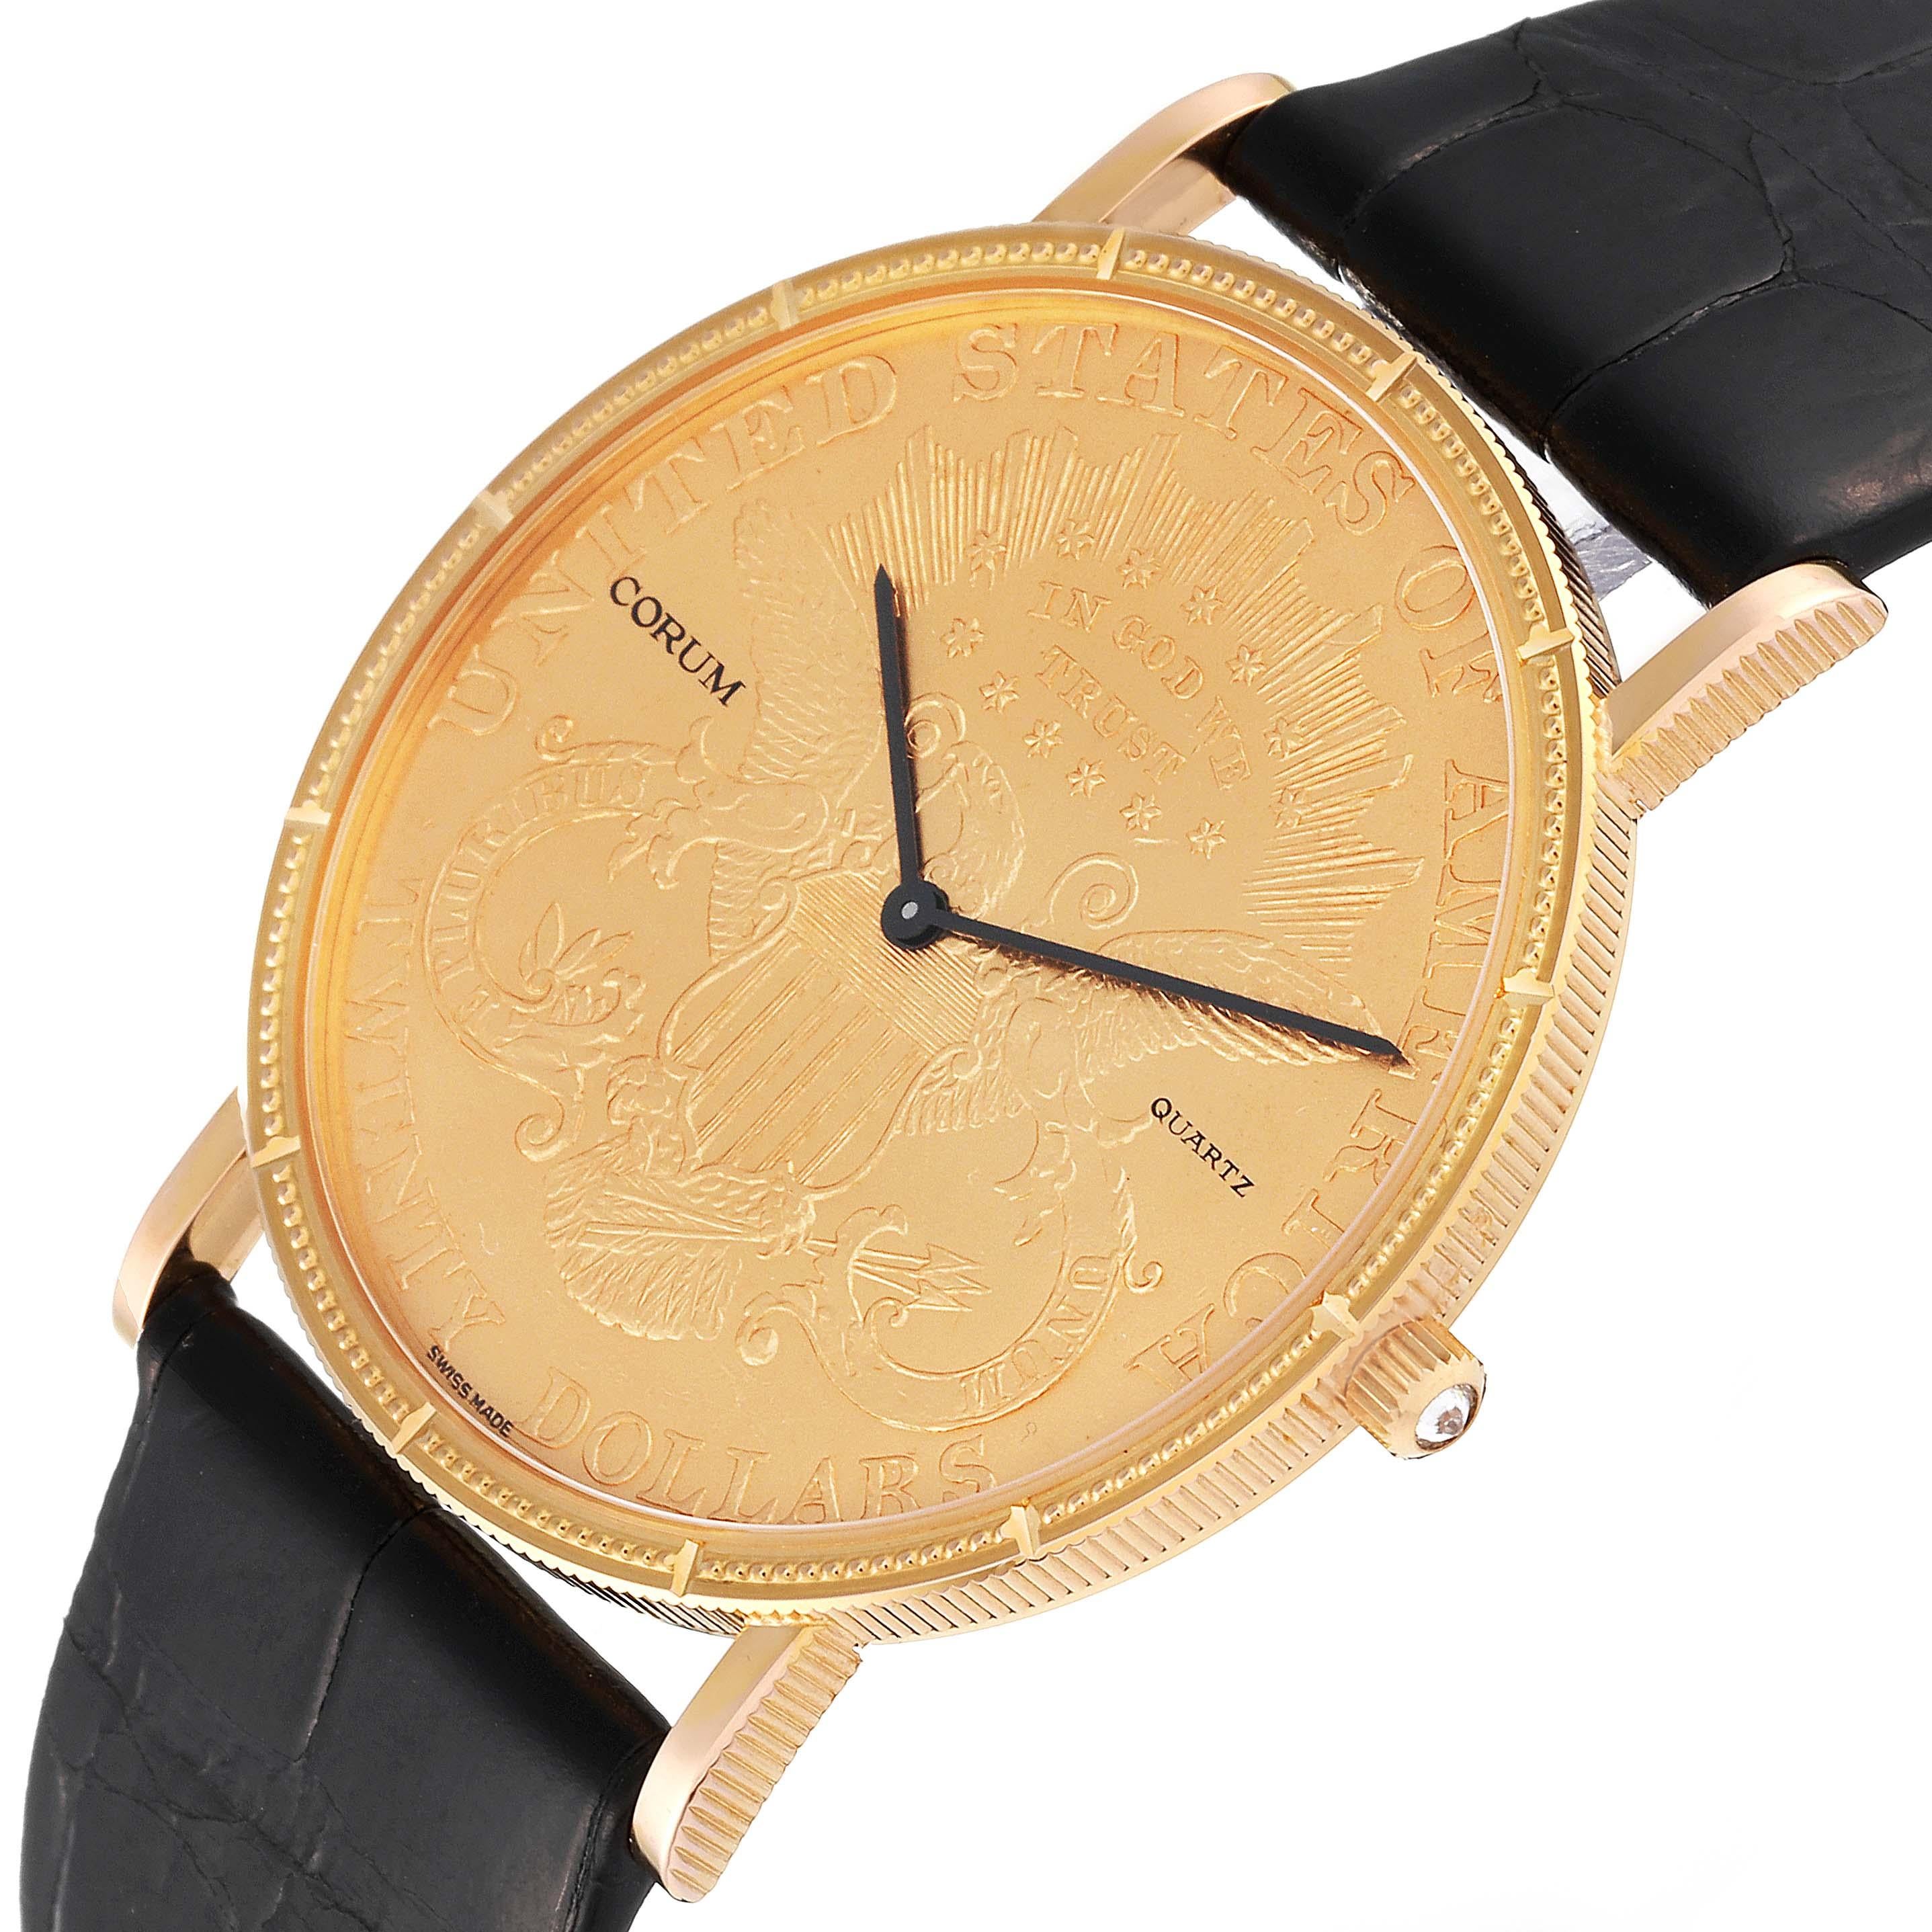 Corum Coin 20 Dollars Double Eagle Yellow Gold Mens Watch 1907. Quartz movement. 18k yellow gold case with 22k coin 35.5 mm in diameter. Coin edge. . Mineral glass crystal. 22k twenty dollar coin with black baton hands. Black leather strap with an